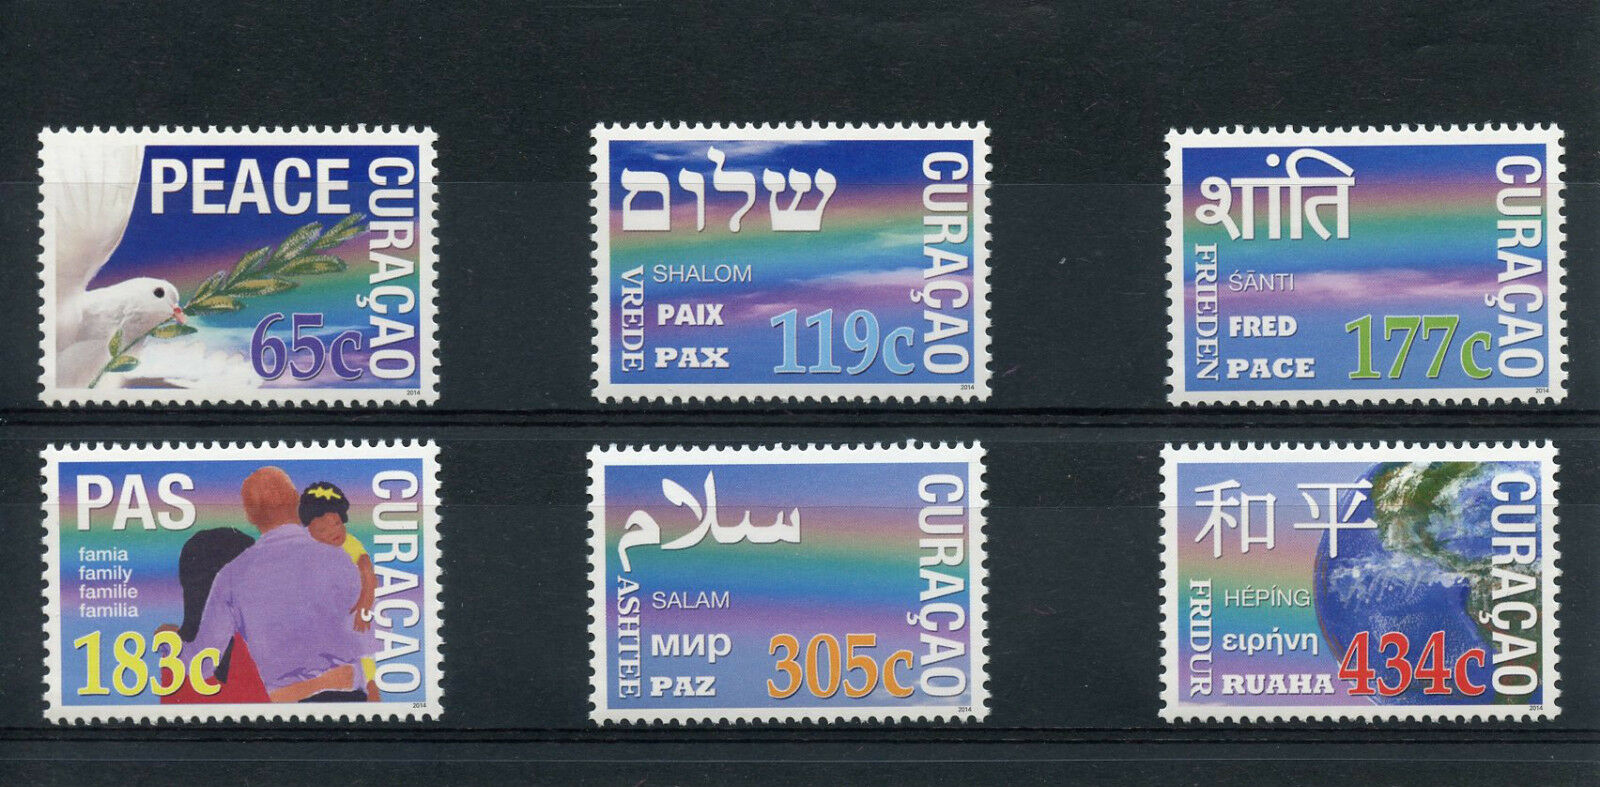 Curacao 2014 MNH Peace 6v Set Dove Shalom Pax Paix Pace Stamps